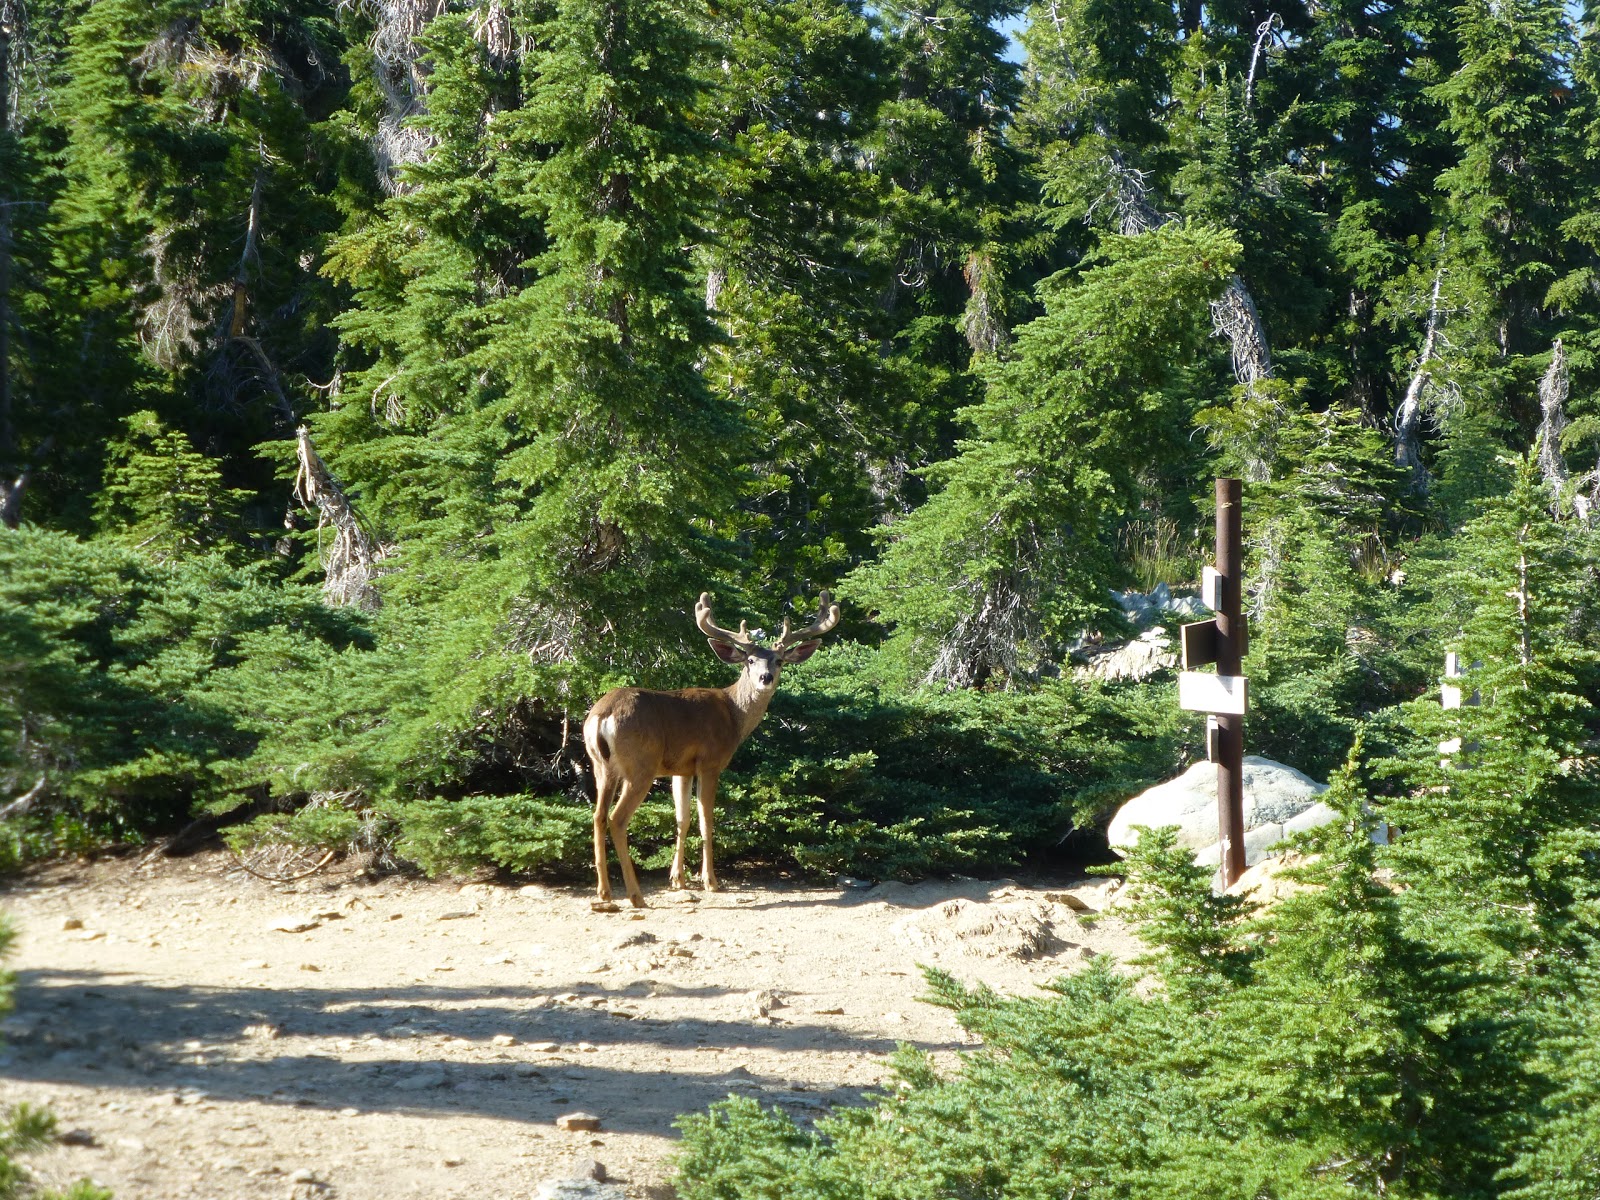 A big deer on the trail, right by where we camped for the night